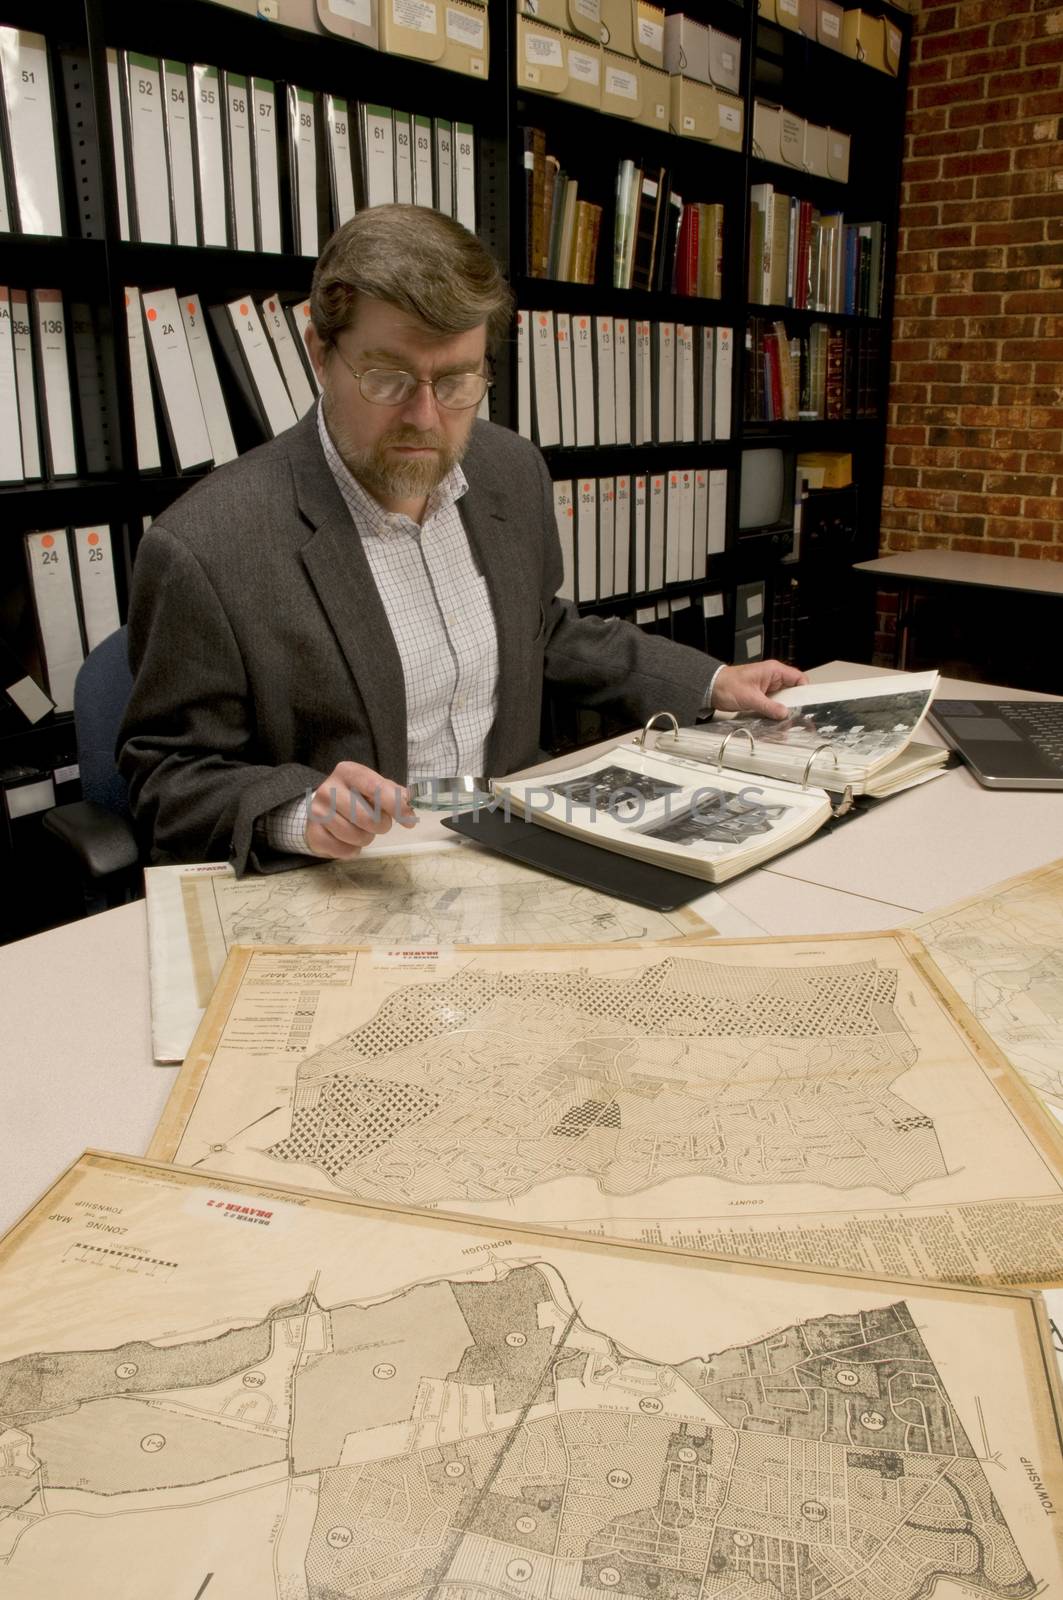 Researcher in archive, searching through maps and photographs. [Maps and photographs on table are public domain. Image on computer creted for this photograph. Model and Property Released.]